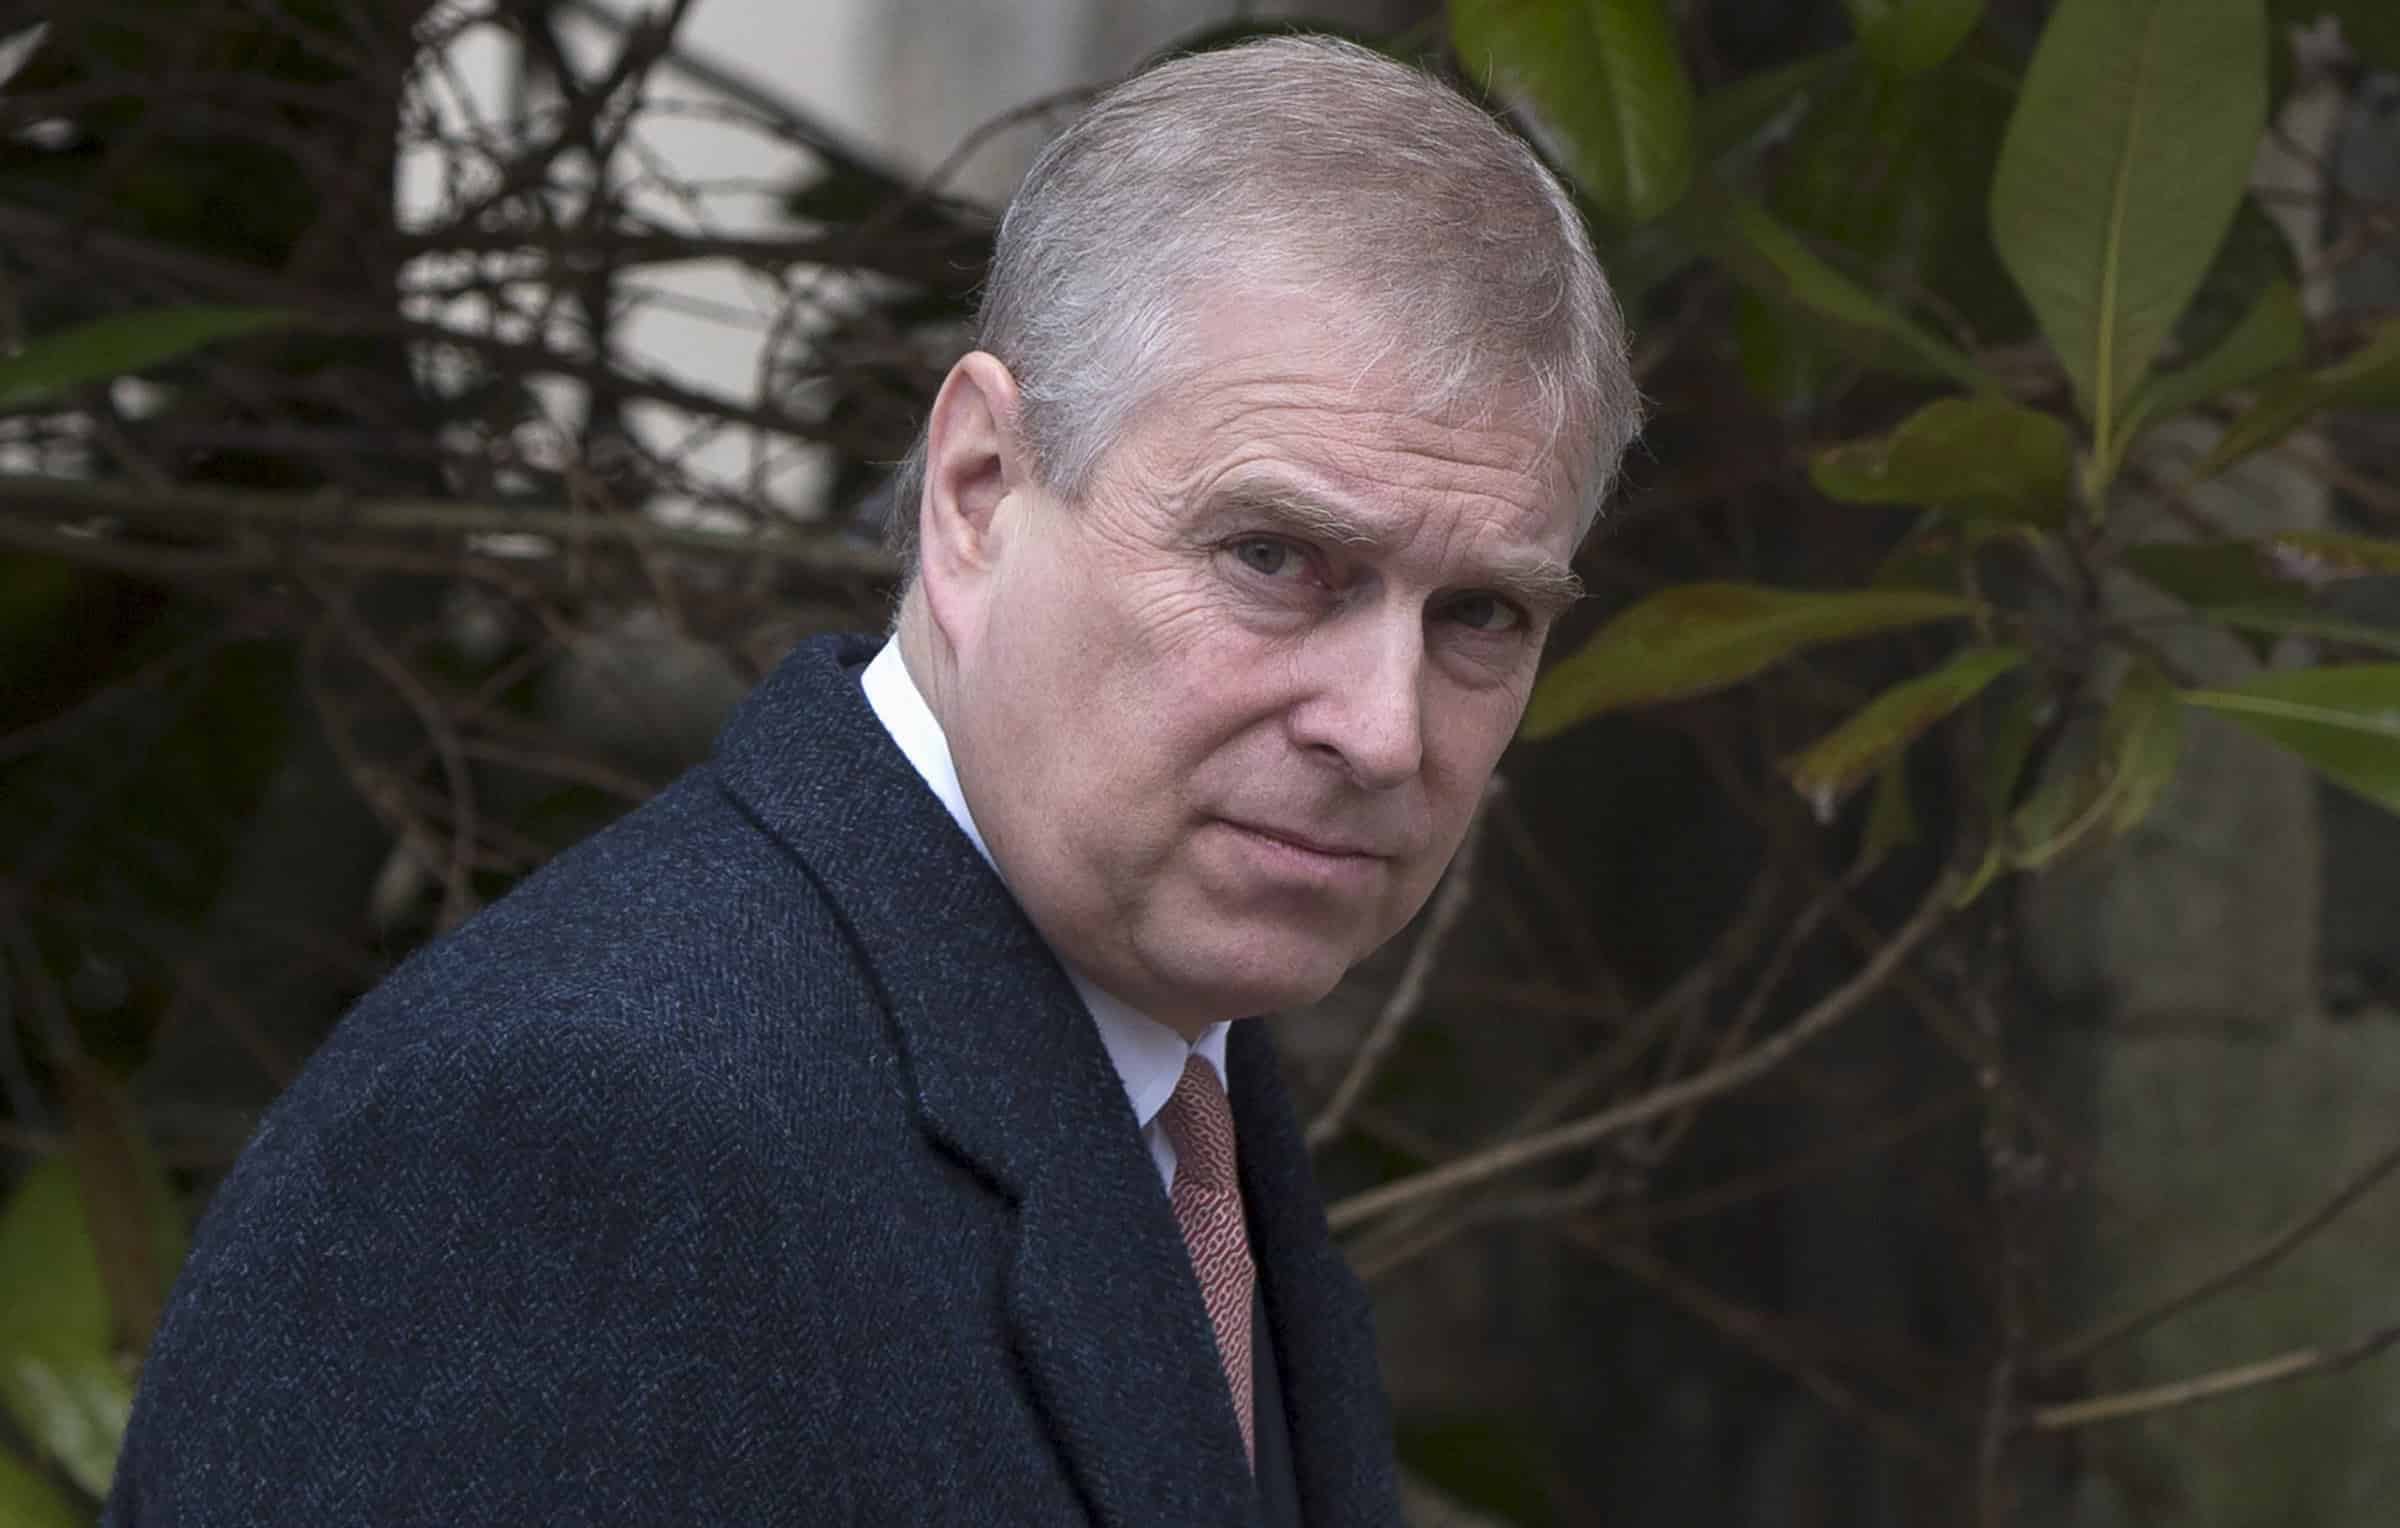 Prince Andrew suffers setback as he attempts to evade sexual assault case